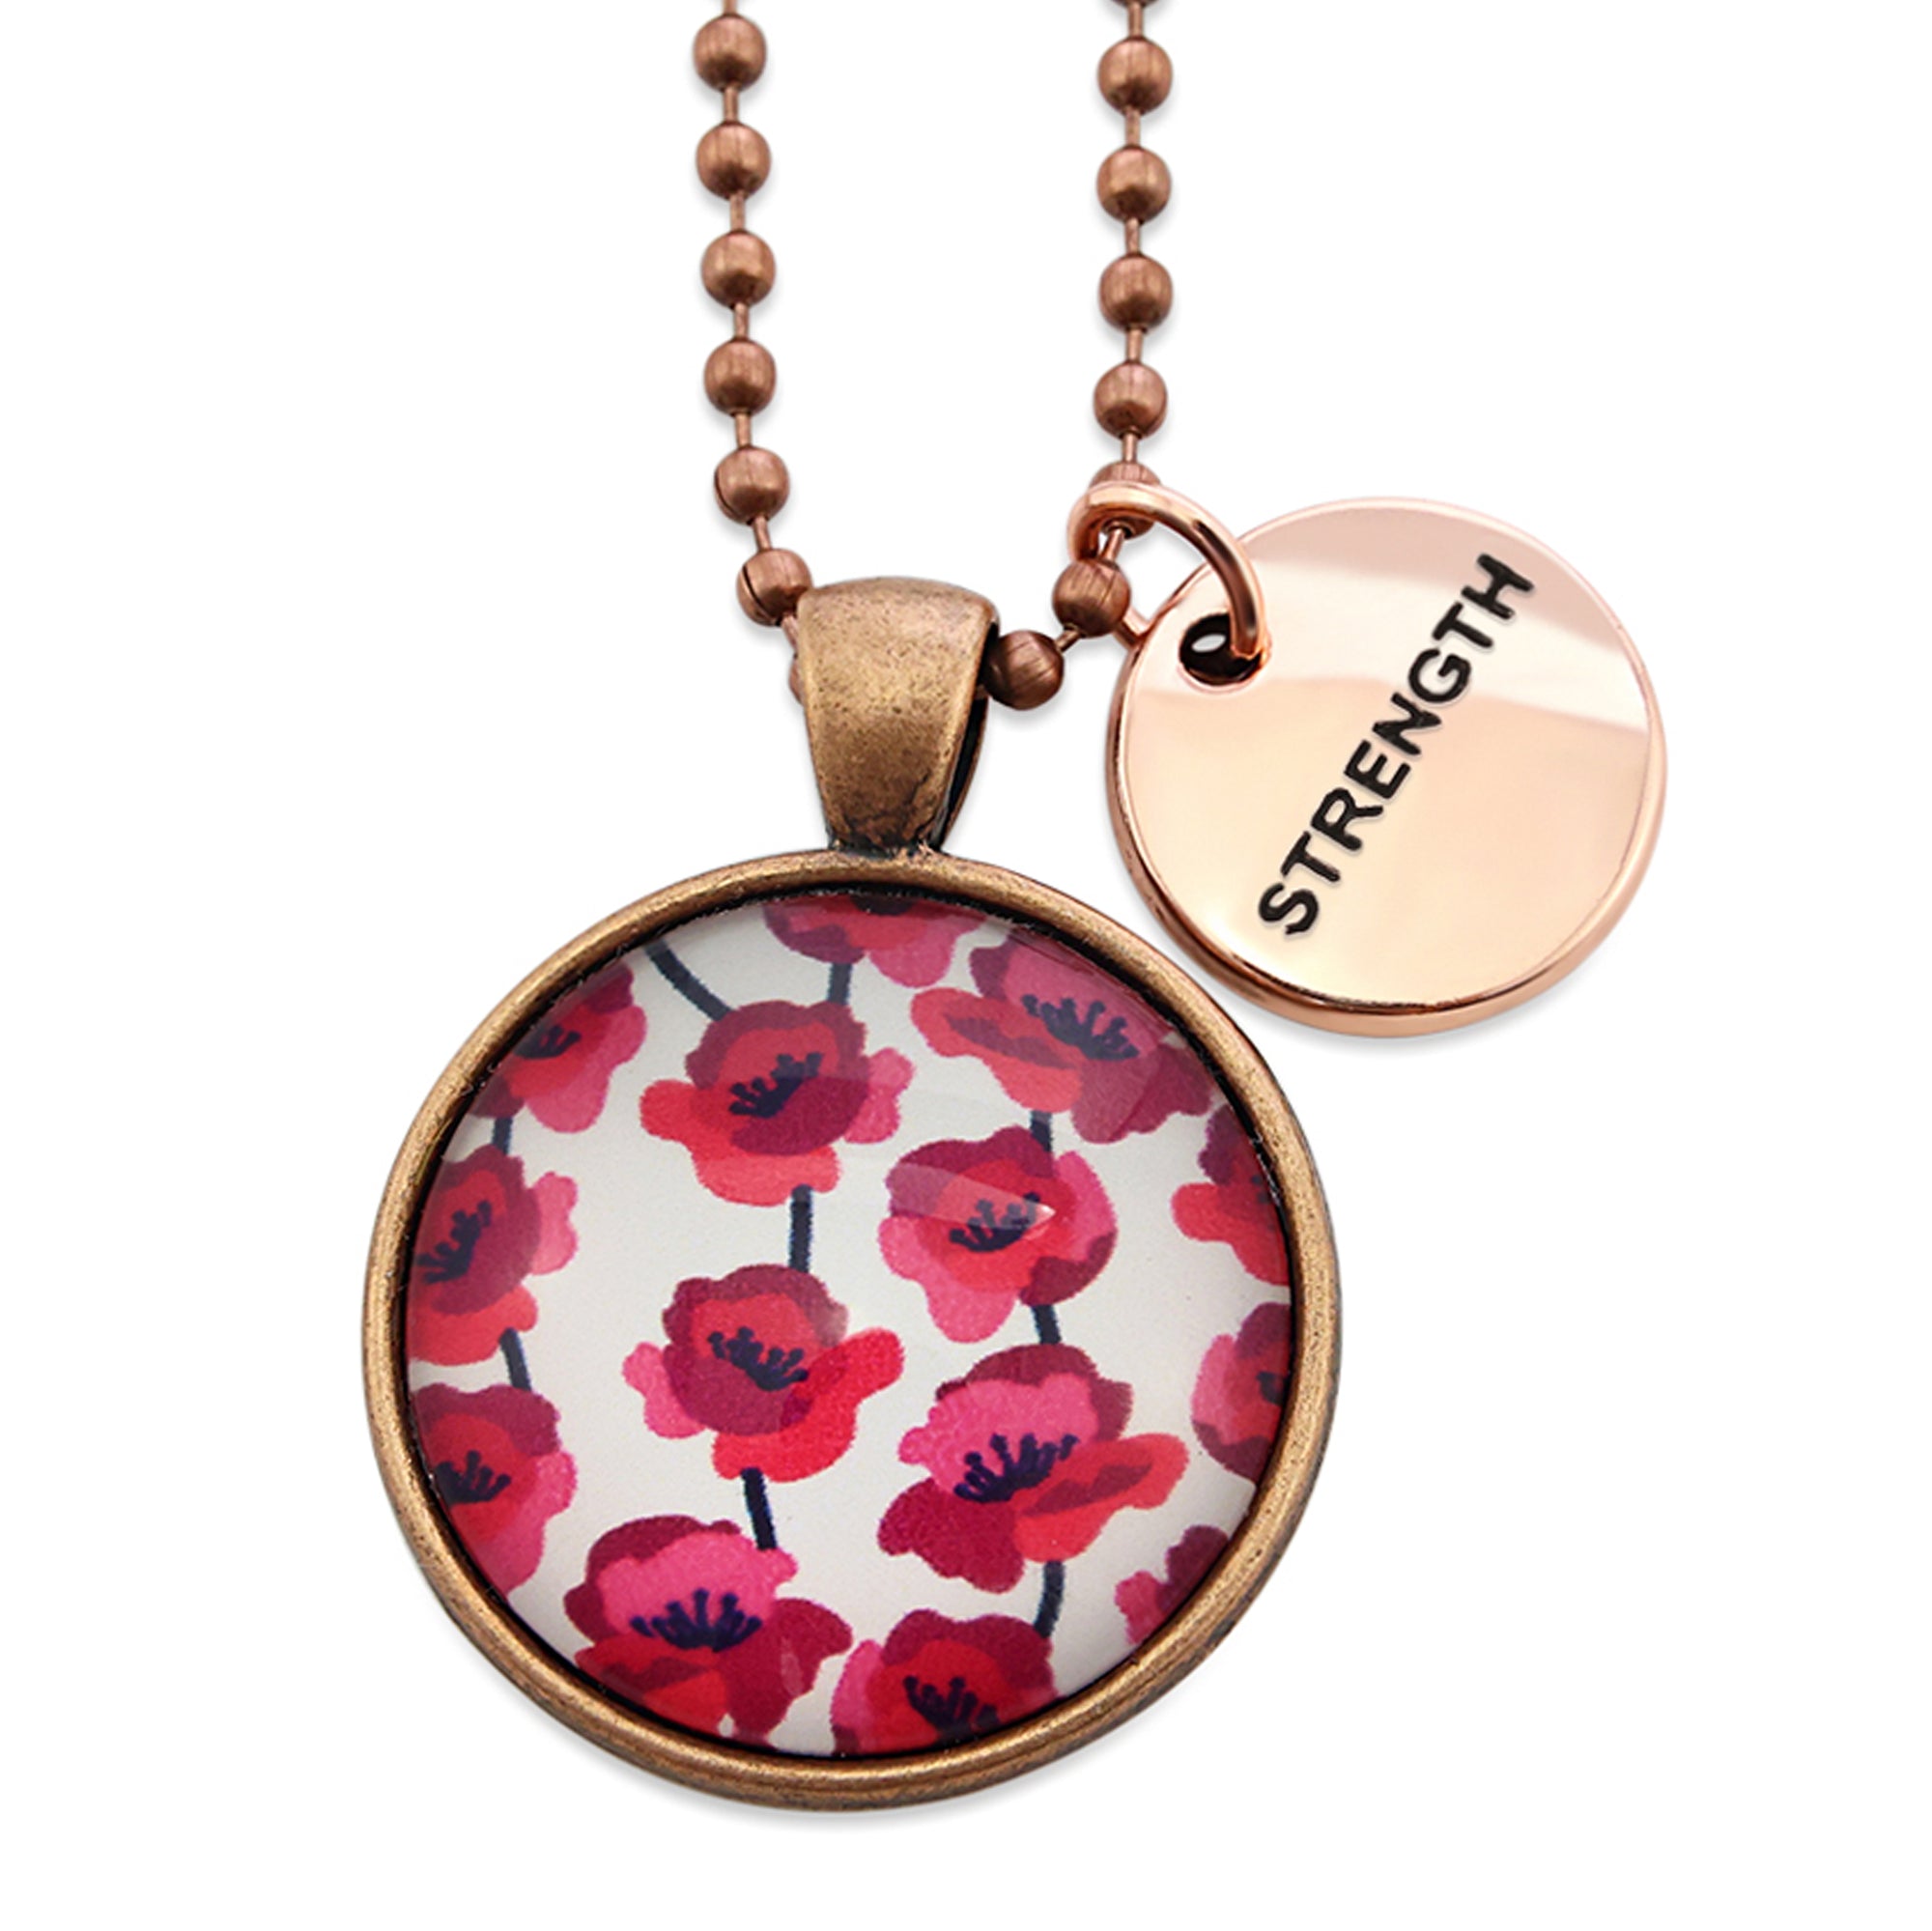 POPPIES Collection - Vintage Copper 'STRENGTH' Necklace - Poppies Print (10444)